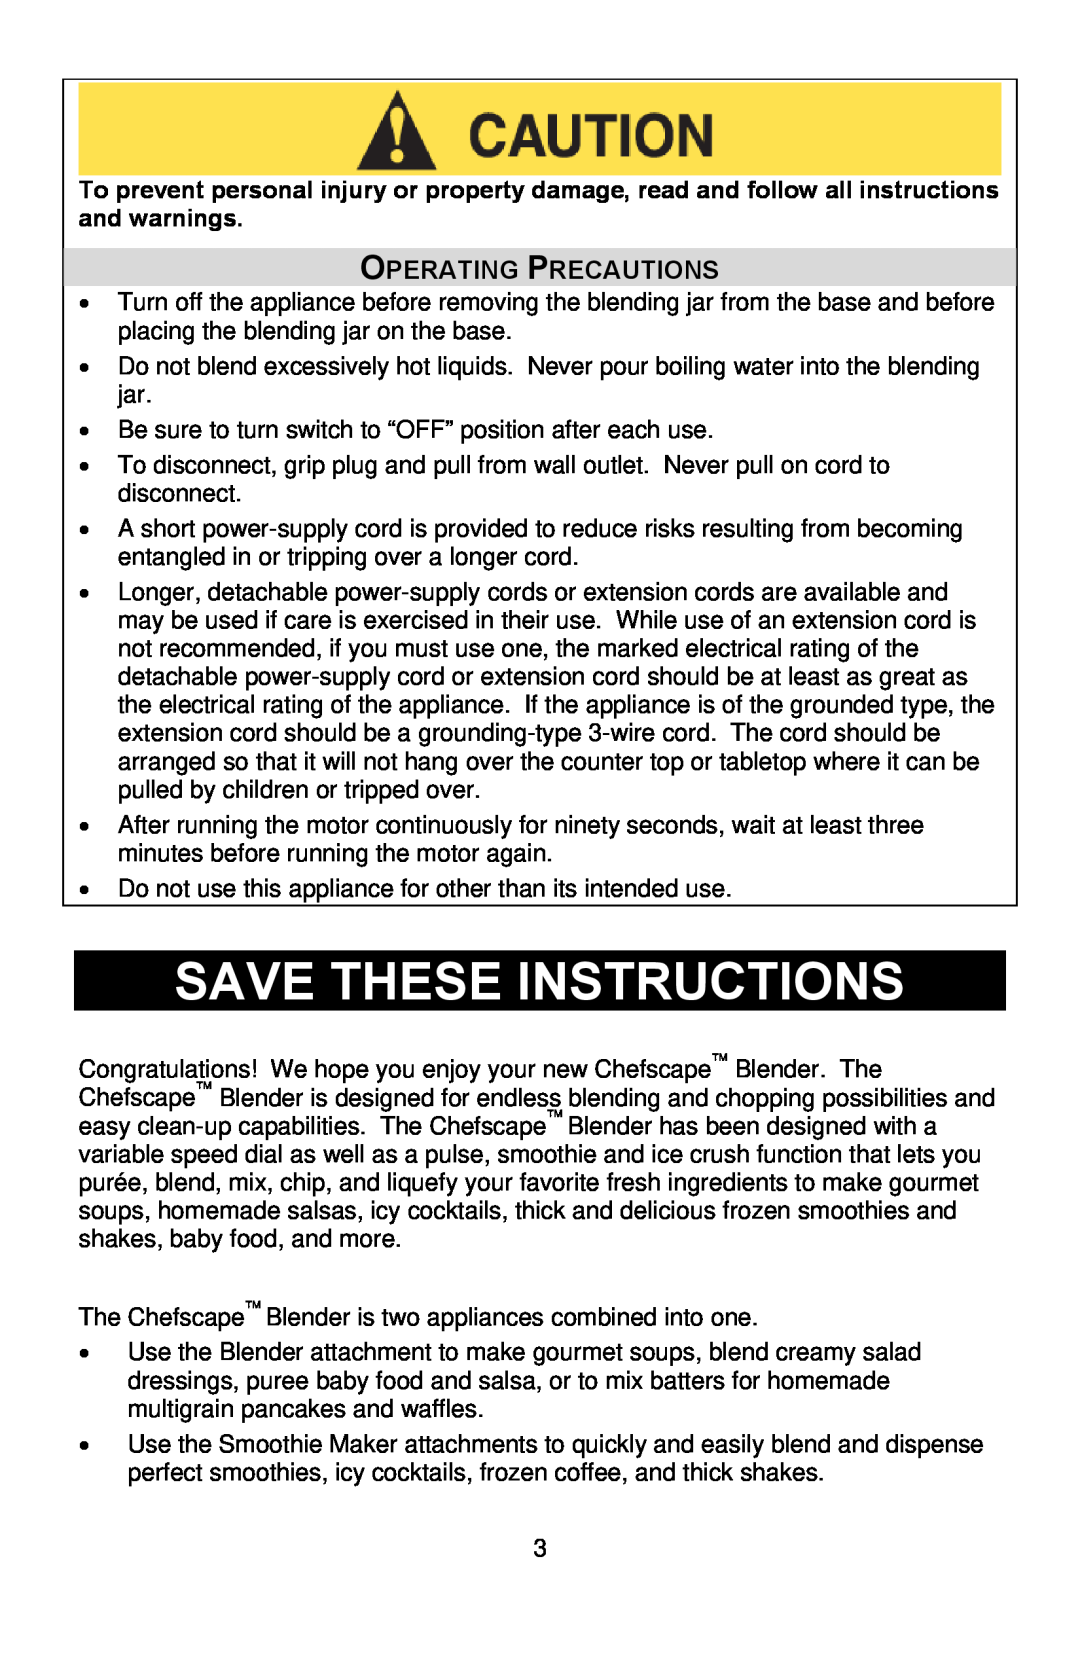 West Bend L5746, PBL1000 instruction manual Save These Instructions, Operating Precautions 